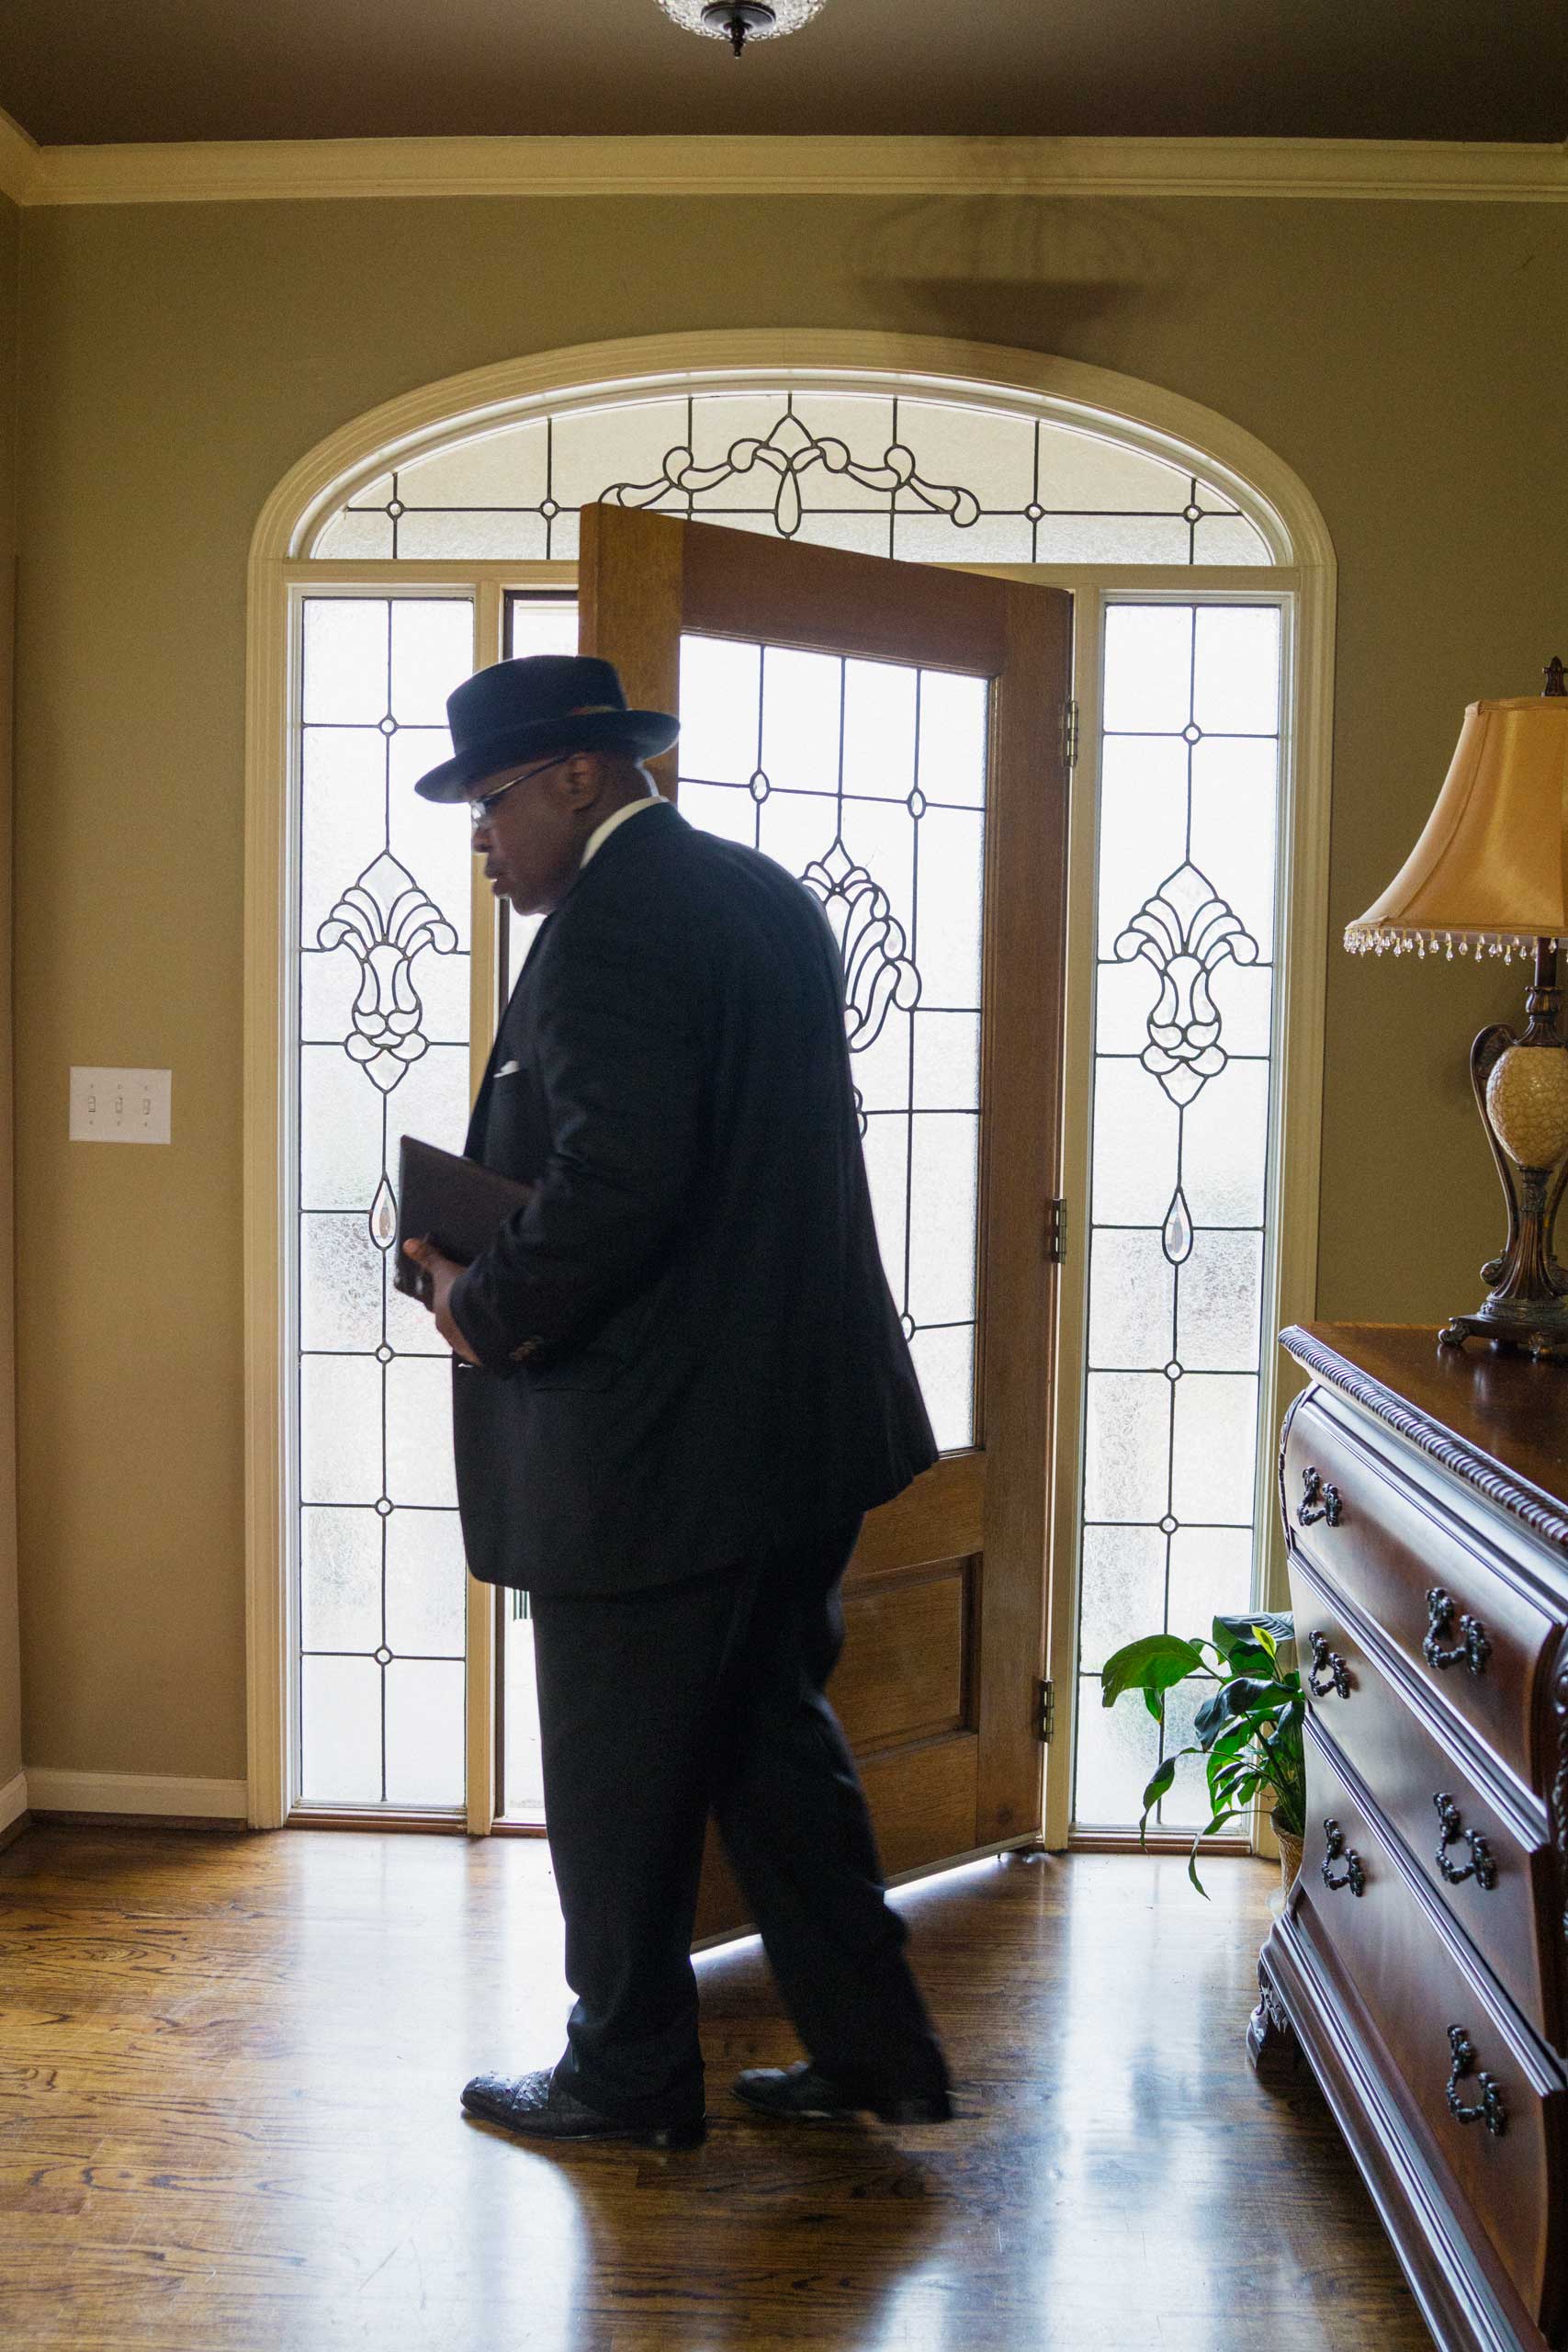 Pete Garrett prepares to leave home to attend Sunday worship at 16th Street Baptist Church in Birmingham on March 22, 2015.